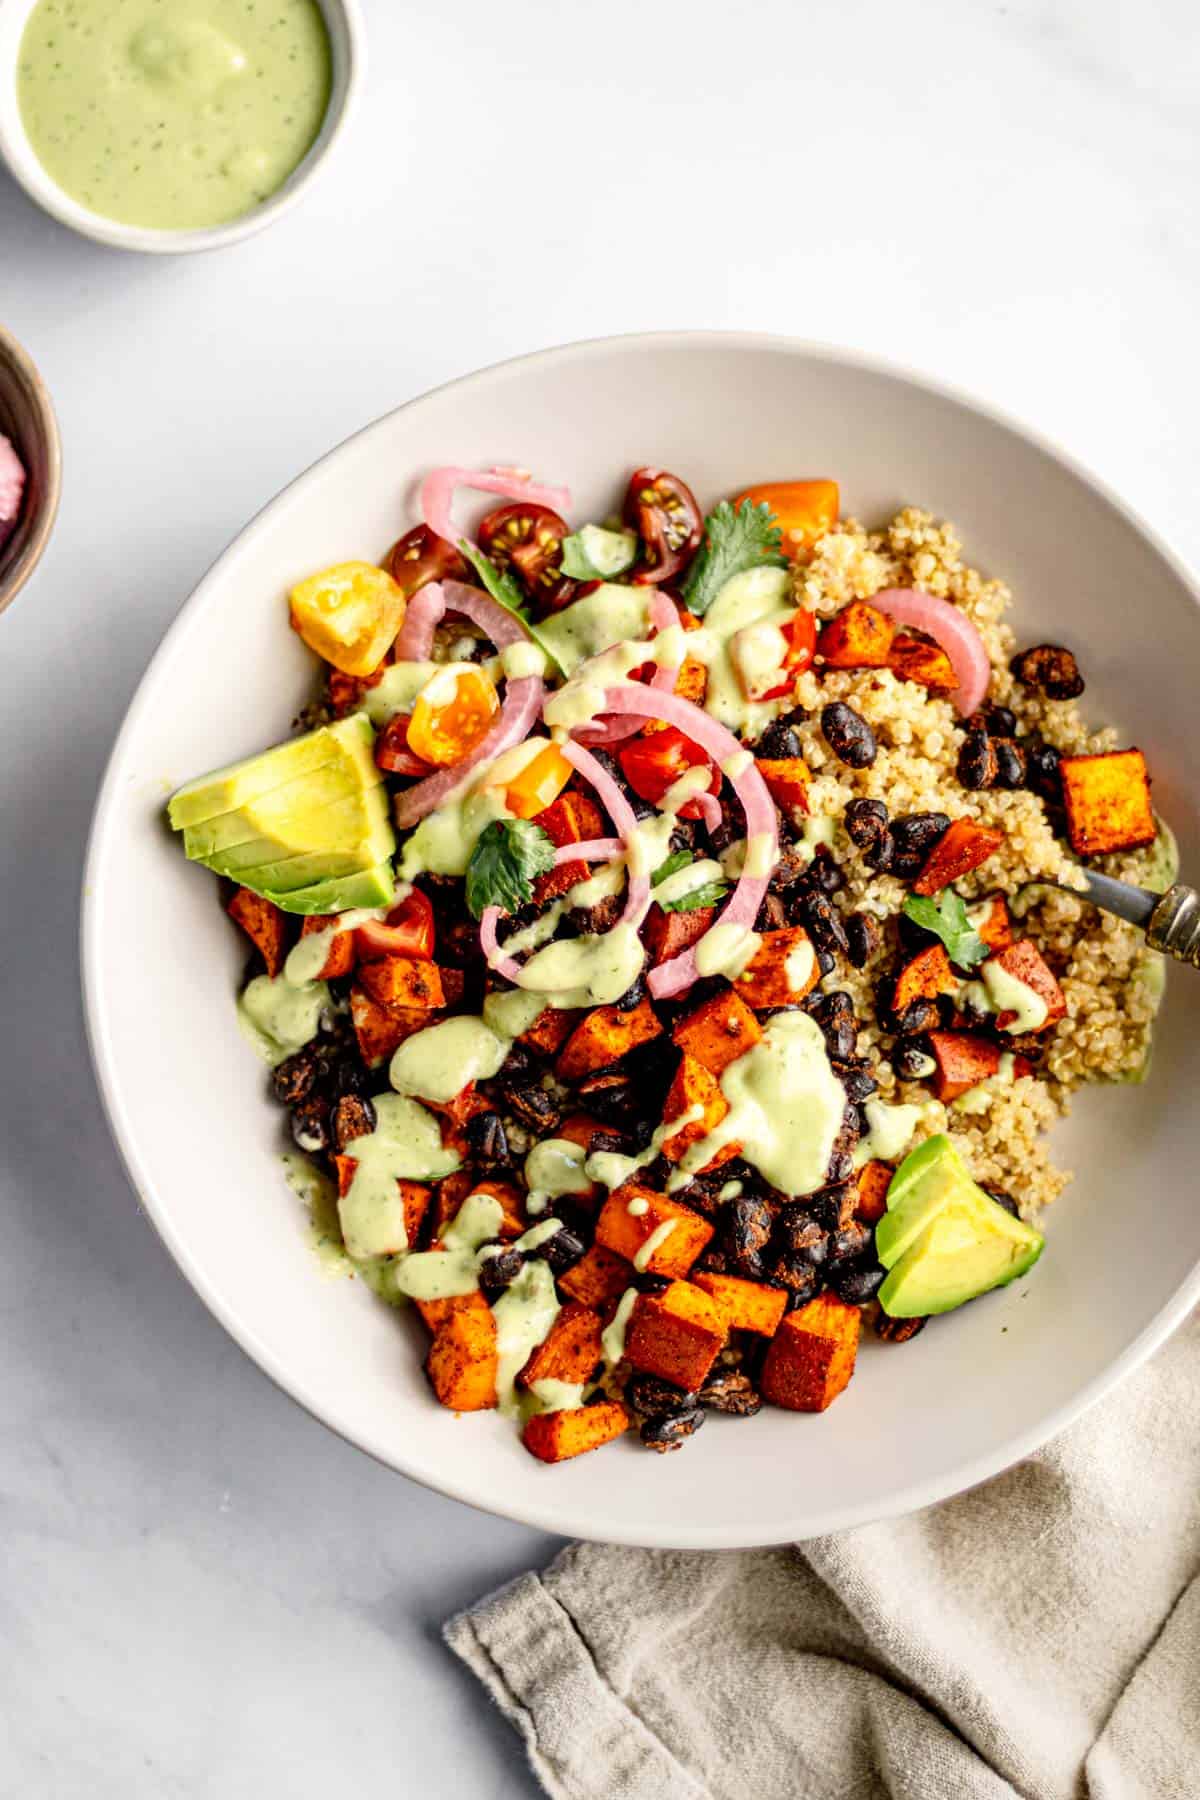 Quinoa bowl with roasted sweet potato and black beans served with avocado dressing.